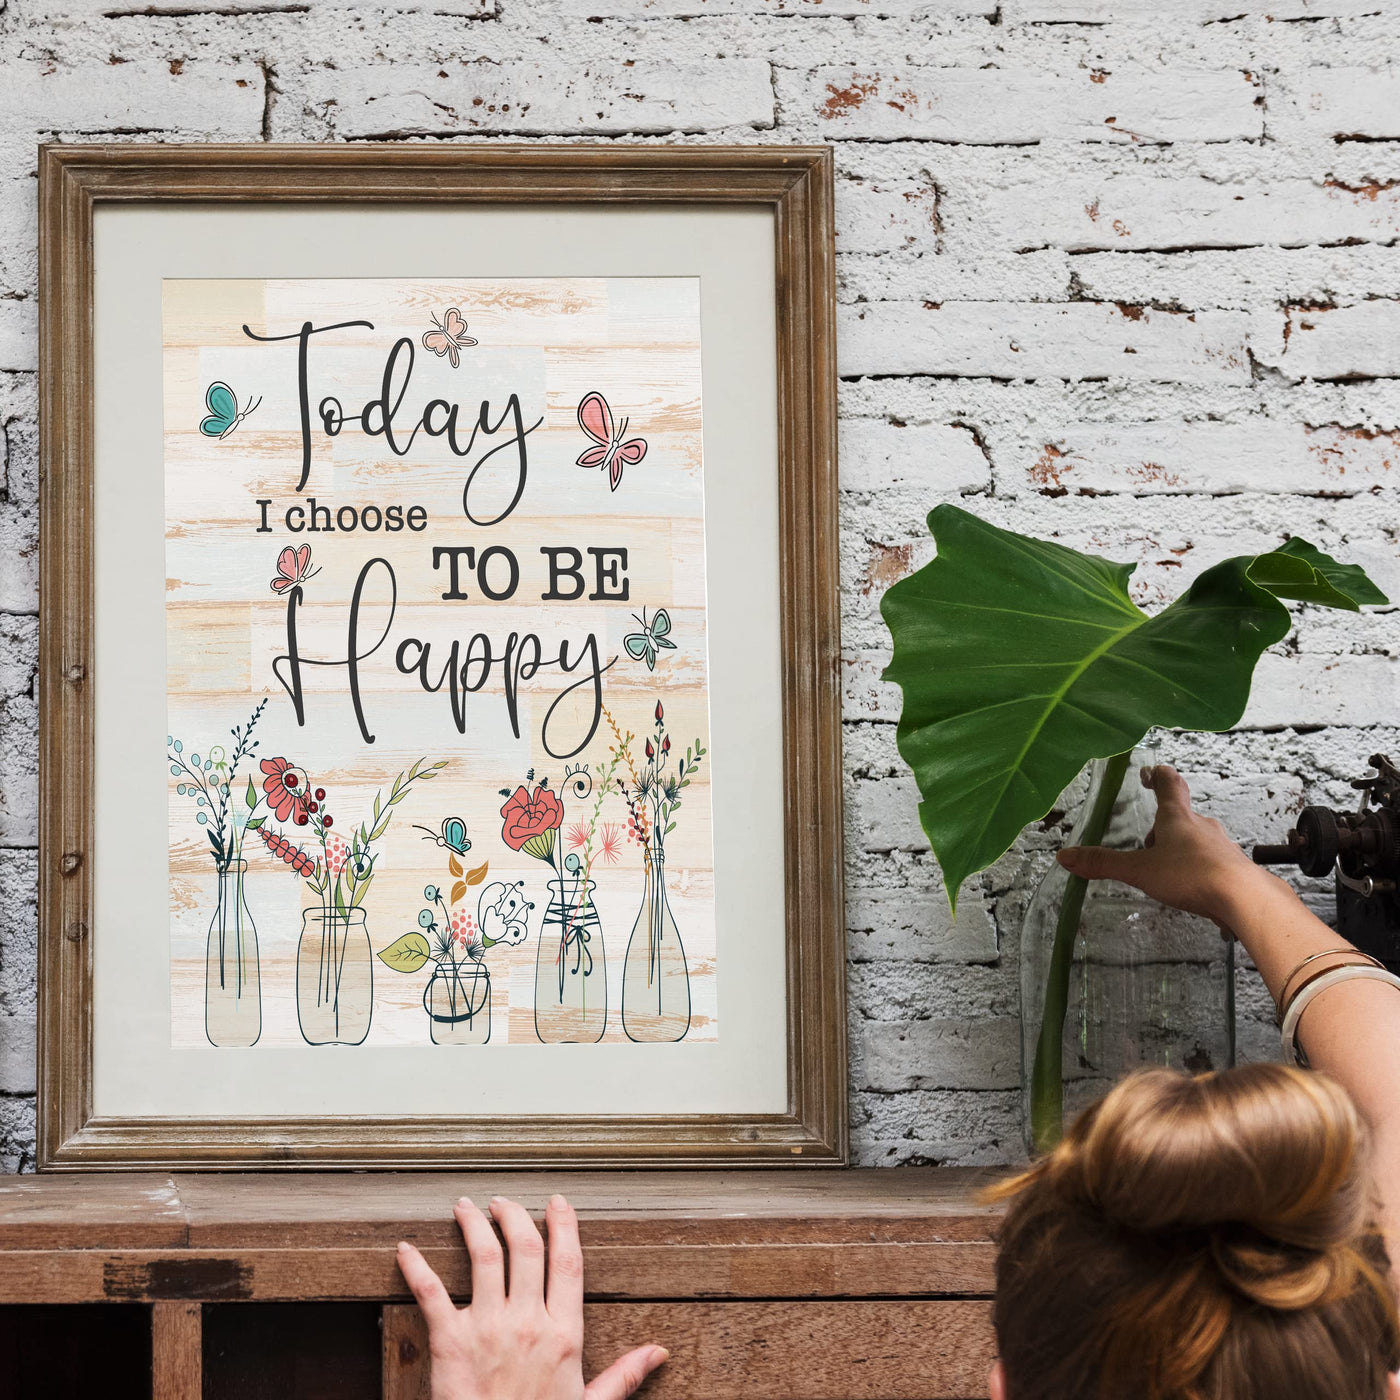 "Today I Choose To Be Happy" Inspirational Quotes Wall Art Sign -8 x 10" Pink Floral Wall Print -Ready to Frame. Motivational Home-Office-Classroom-Library-Positive Decor. Inspiring Gift!